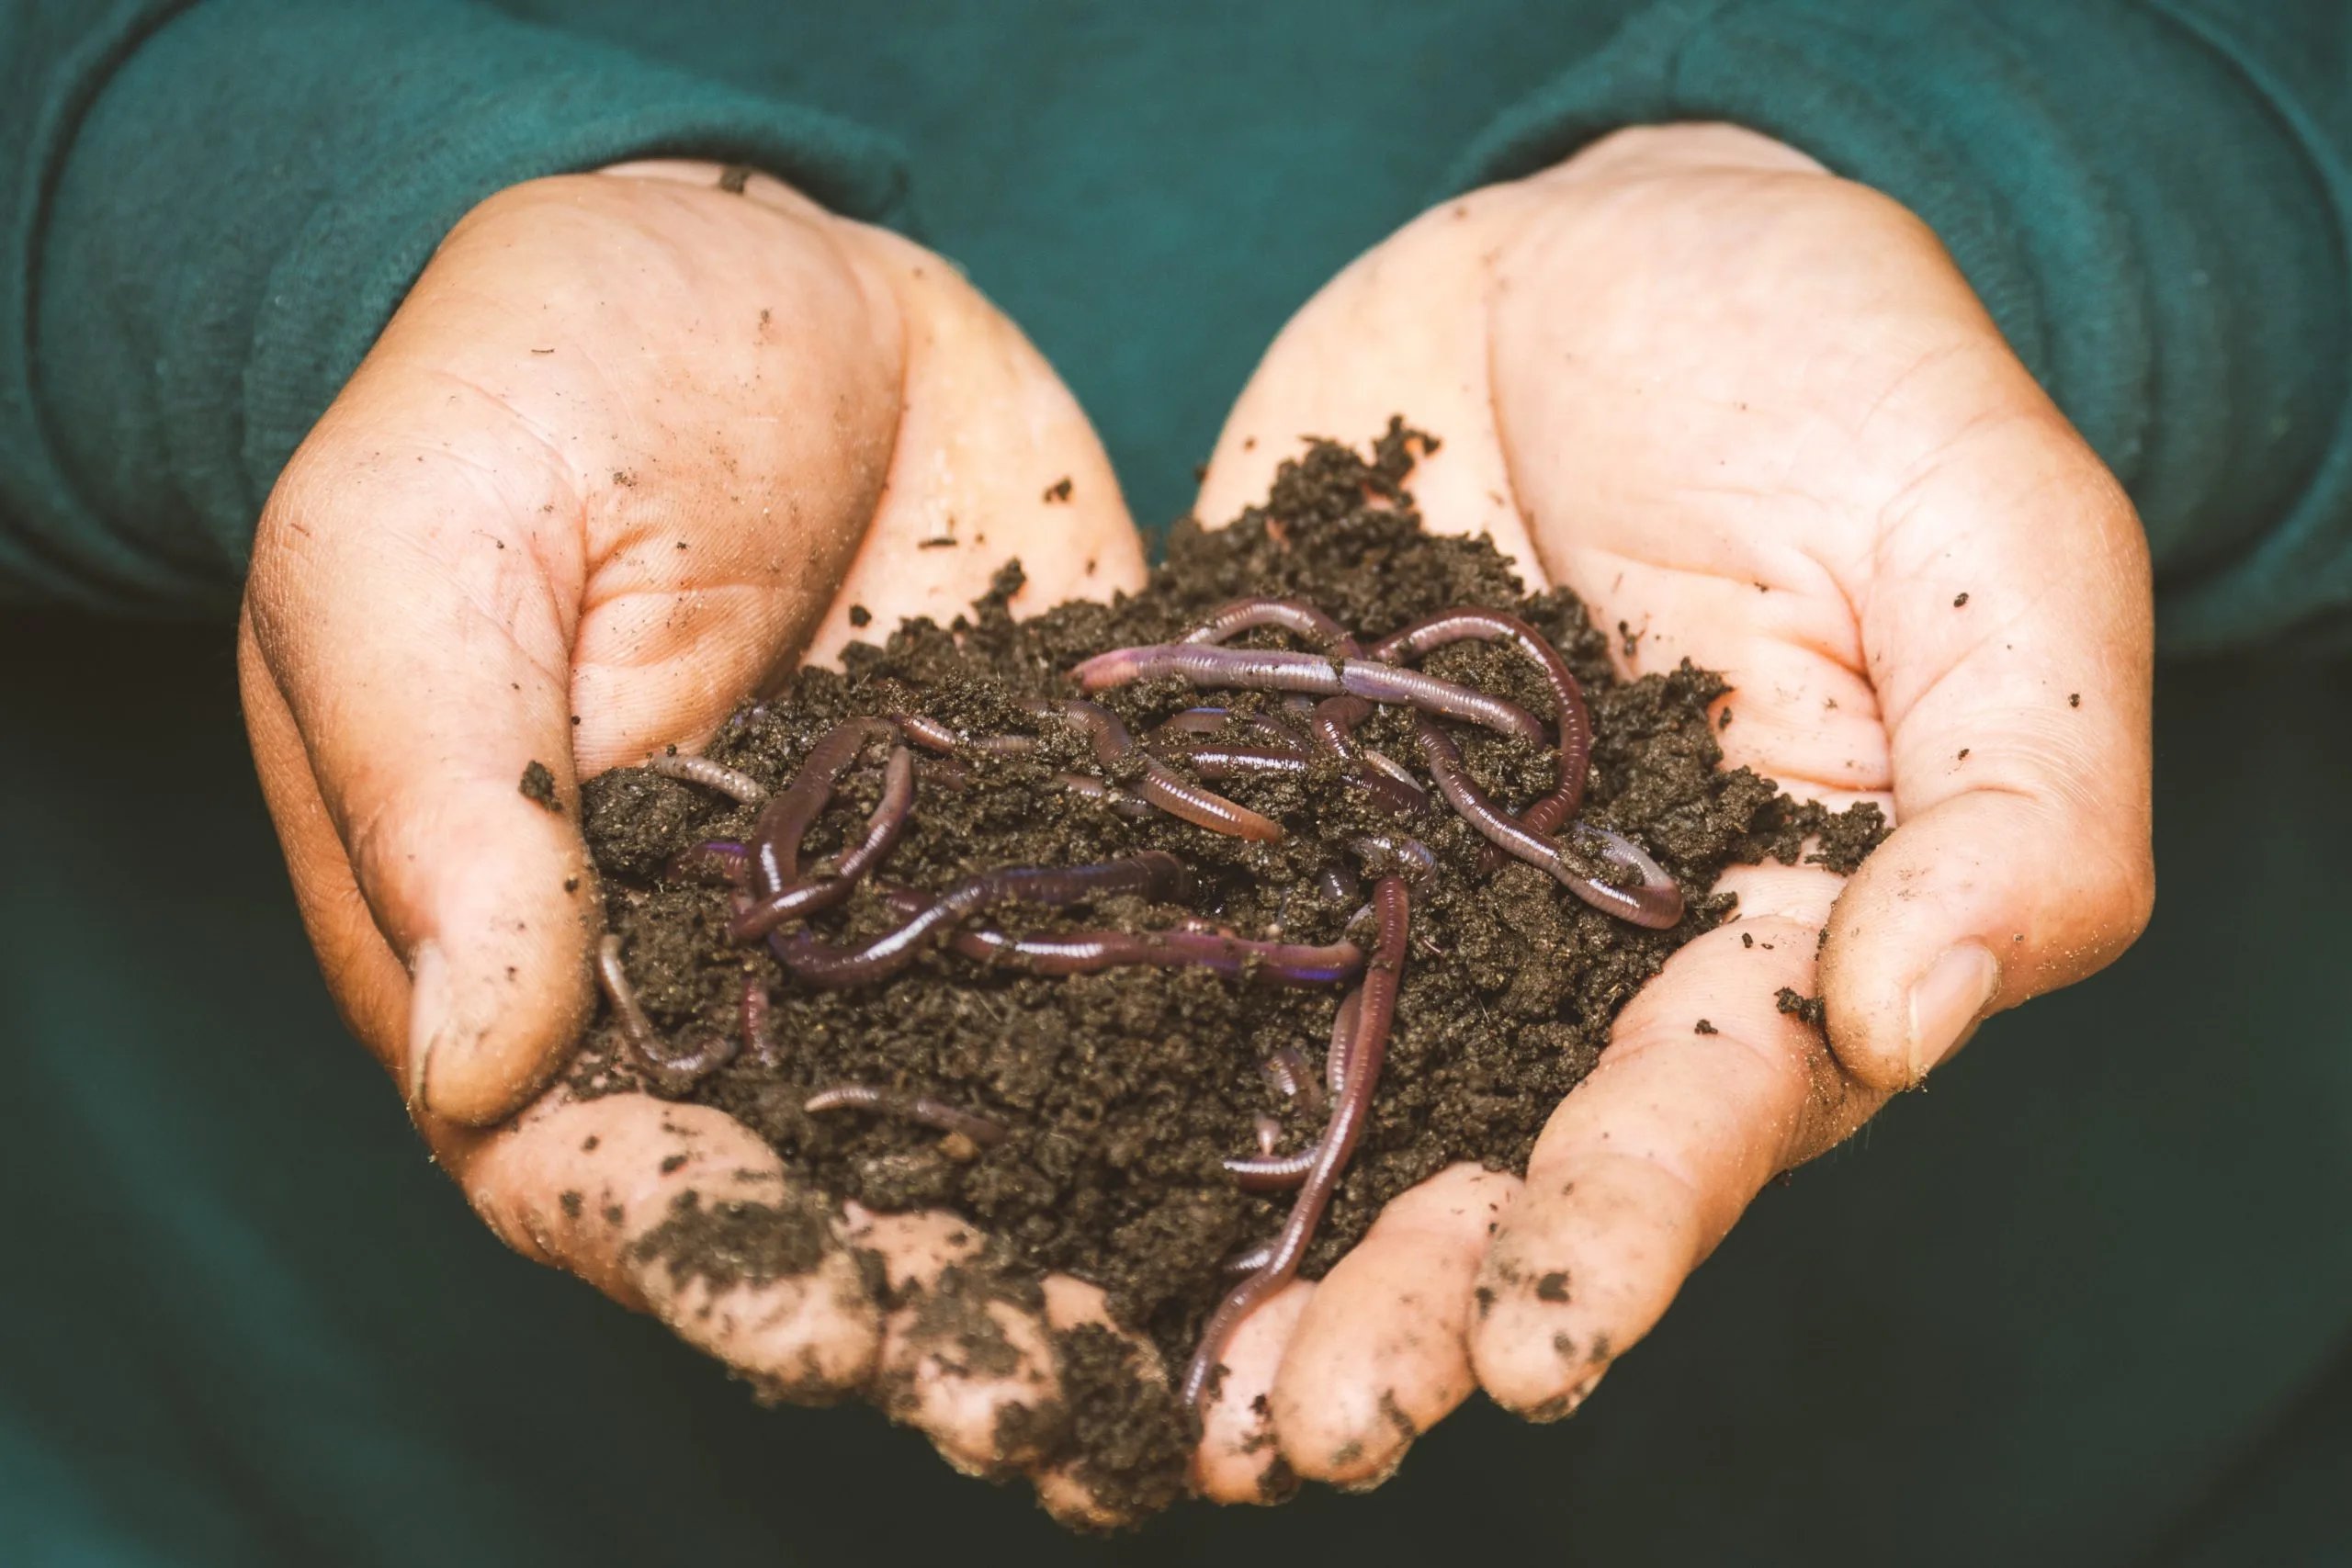 Human Composting: The Burial Option on The Rise